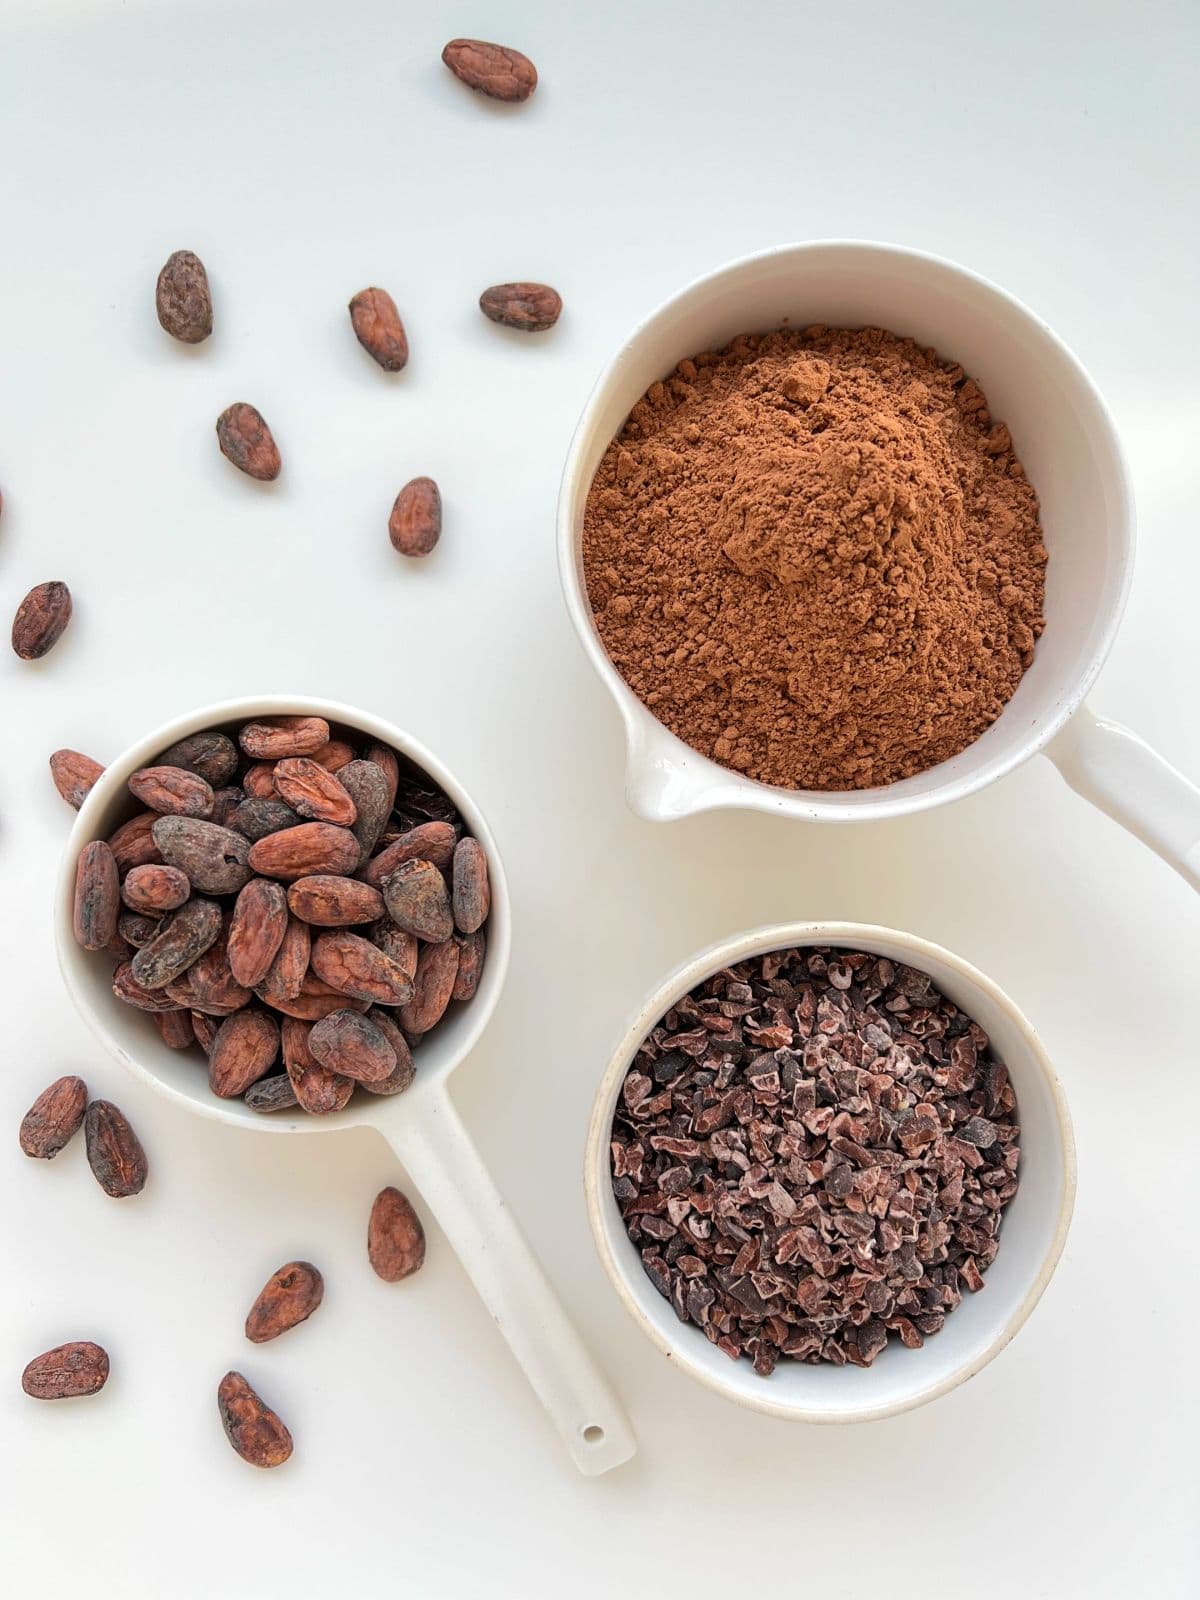 Three small white ceramic bowls each contain cacao beans, cacao powder, and cacao nibs.